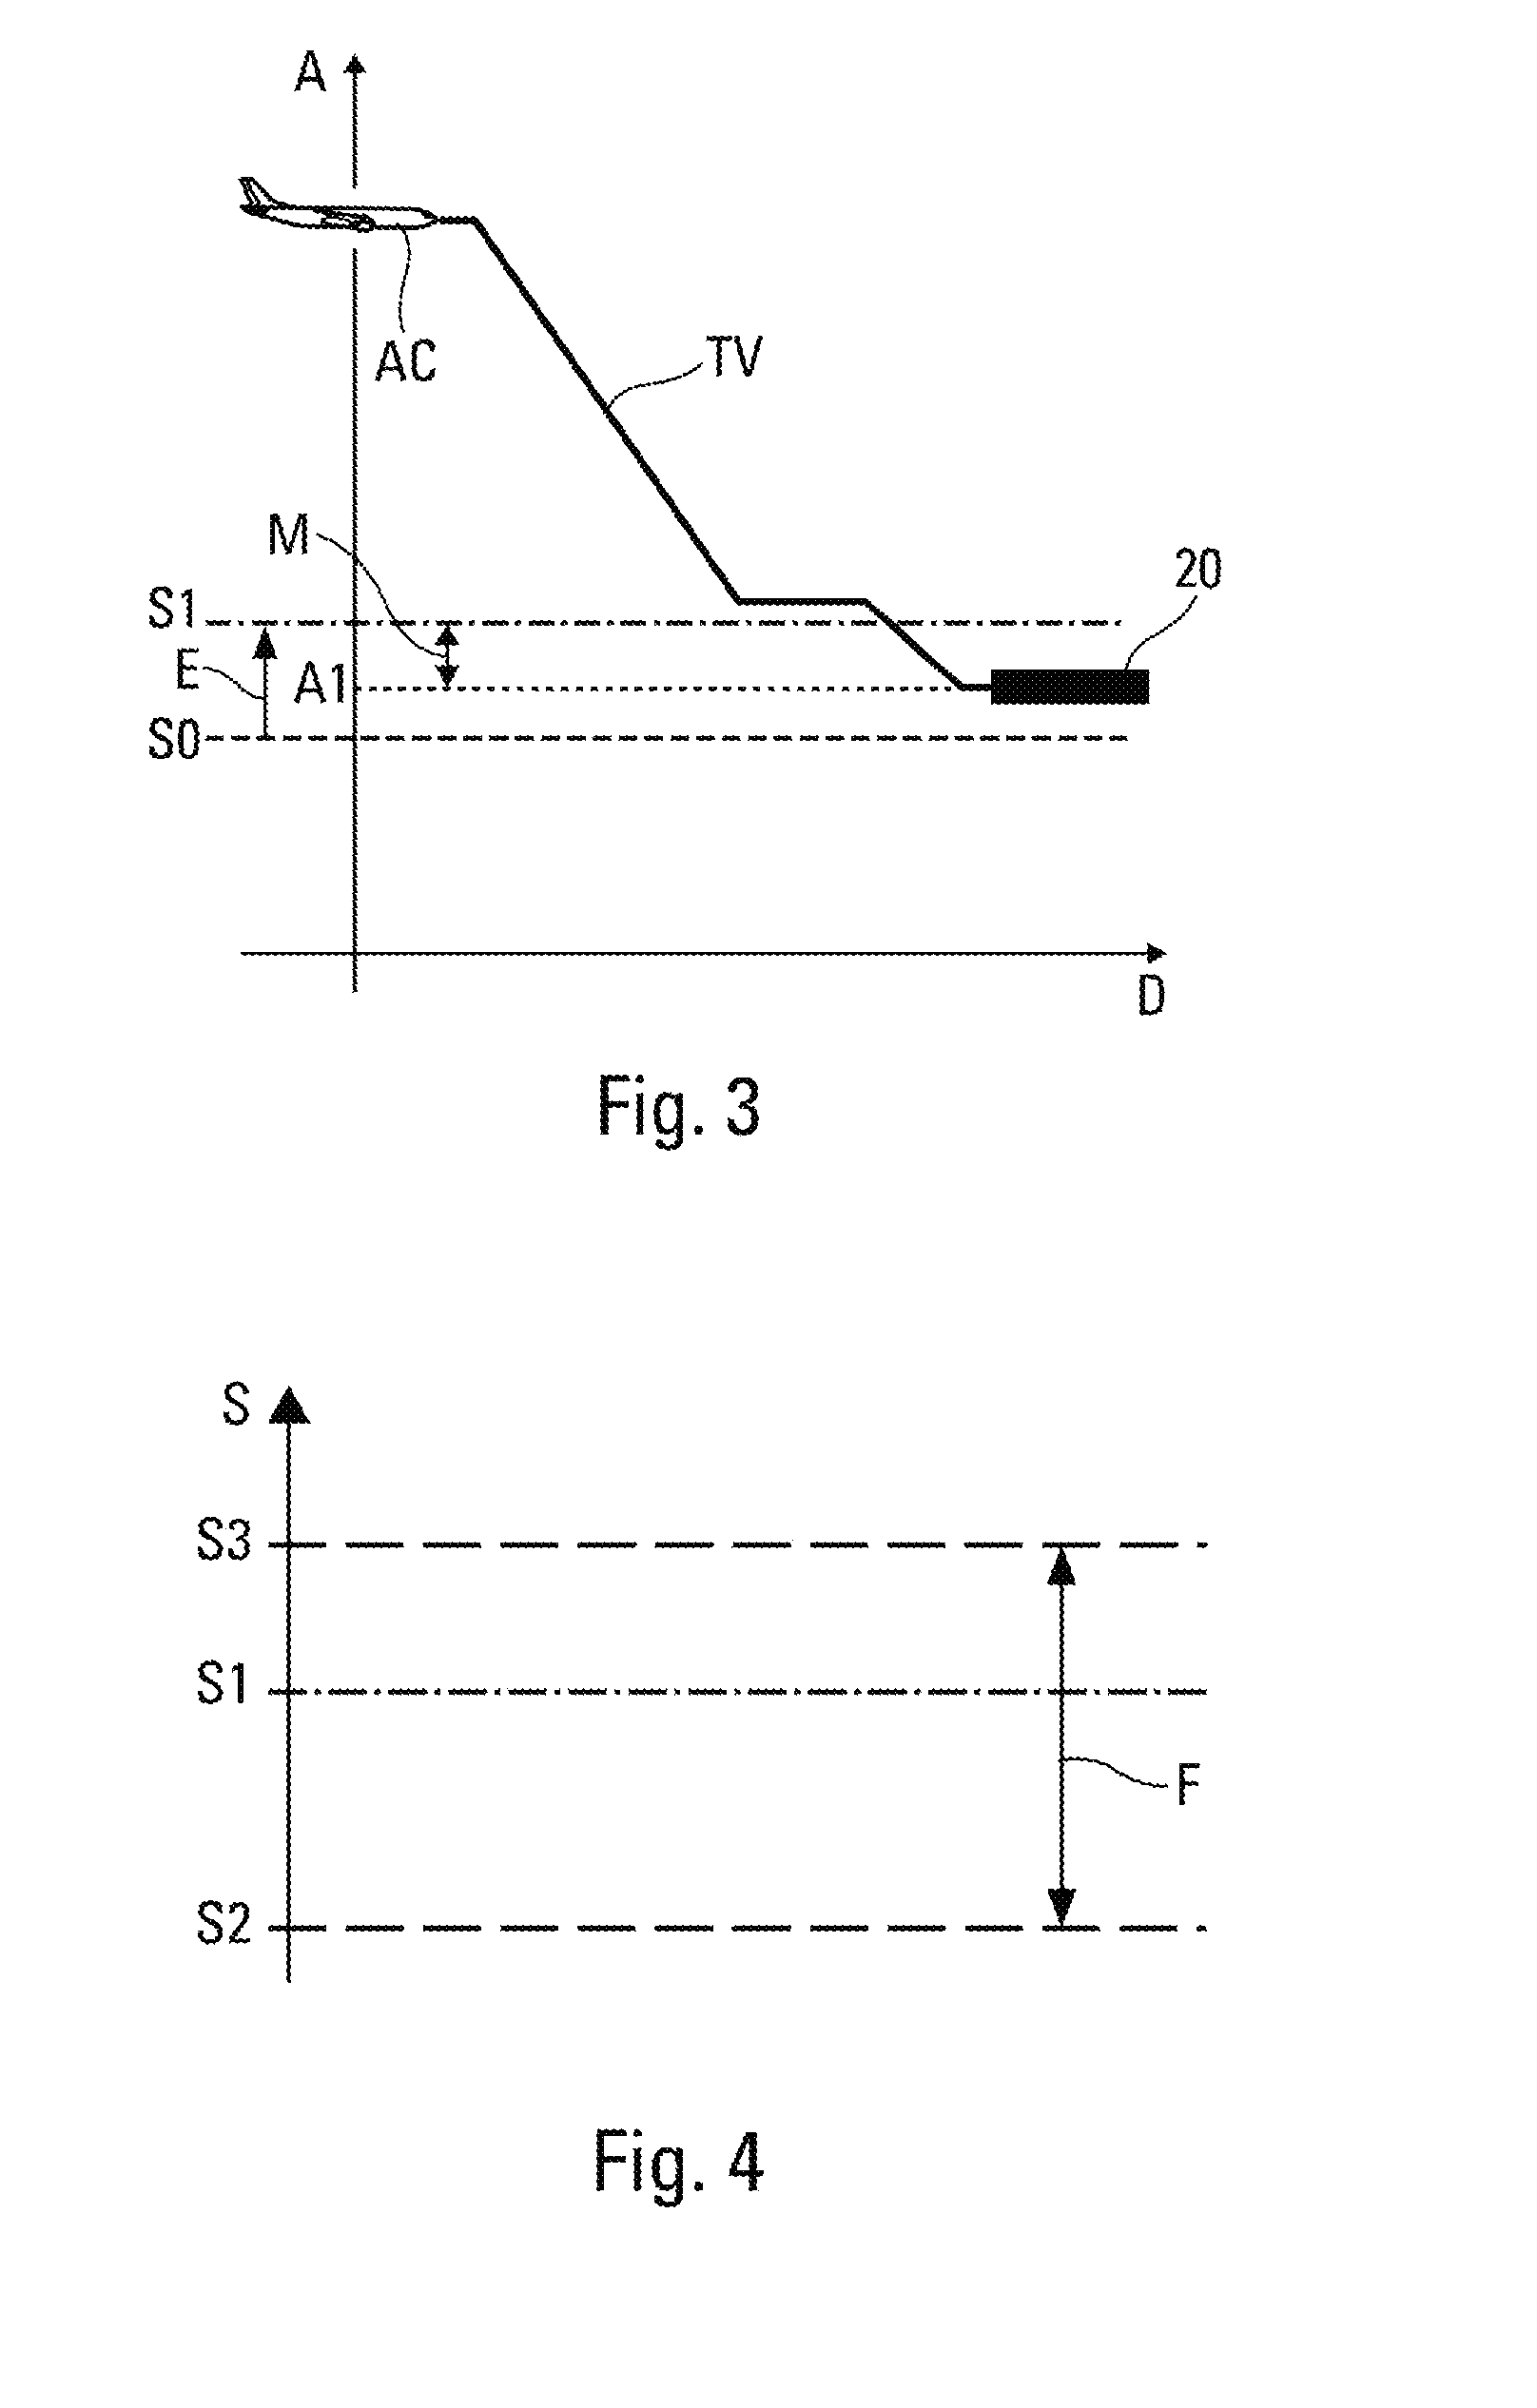 Method and device for automatically engaging an automated emergency descent of an aircraft